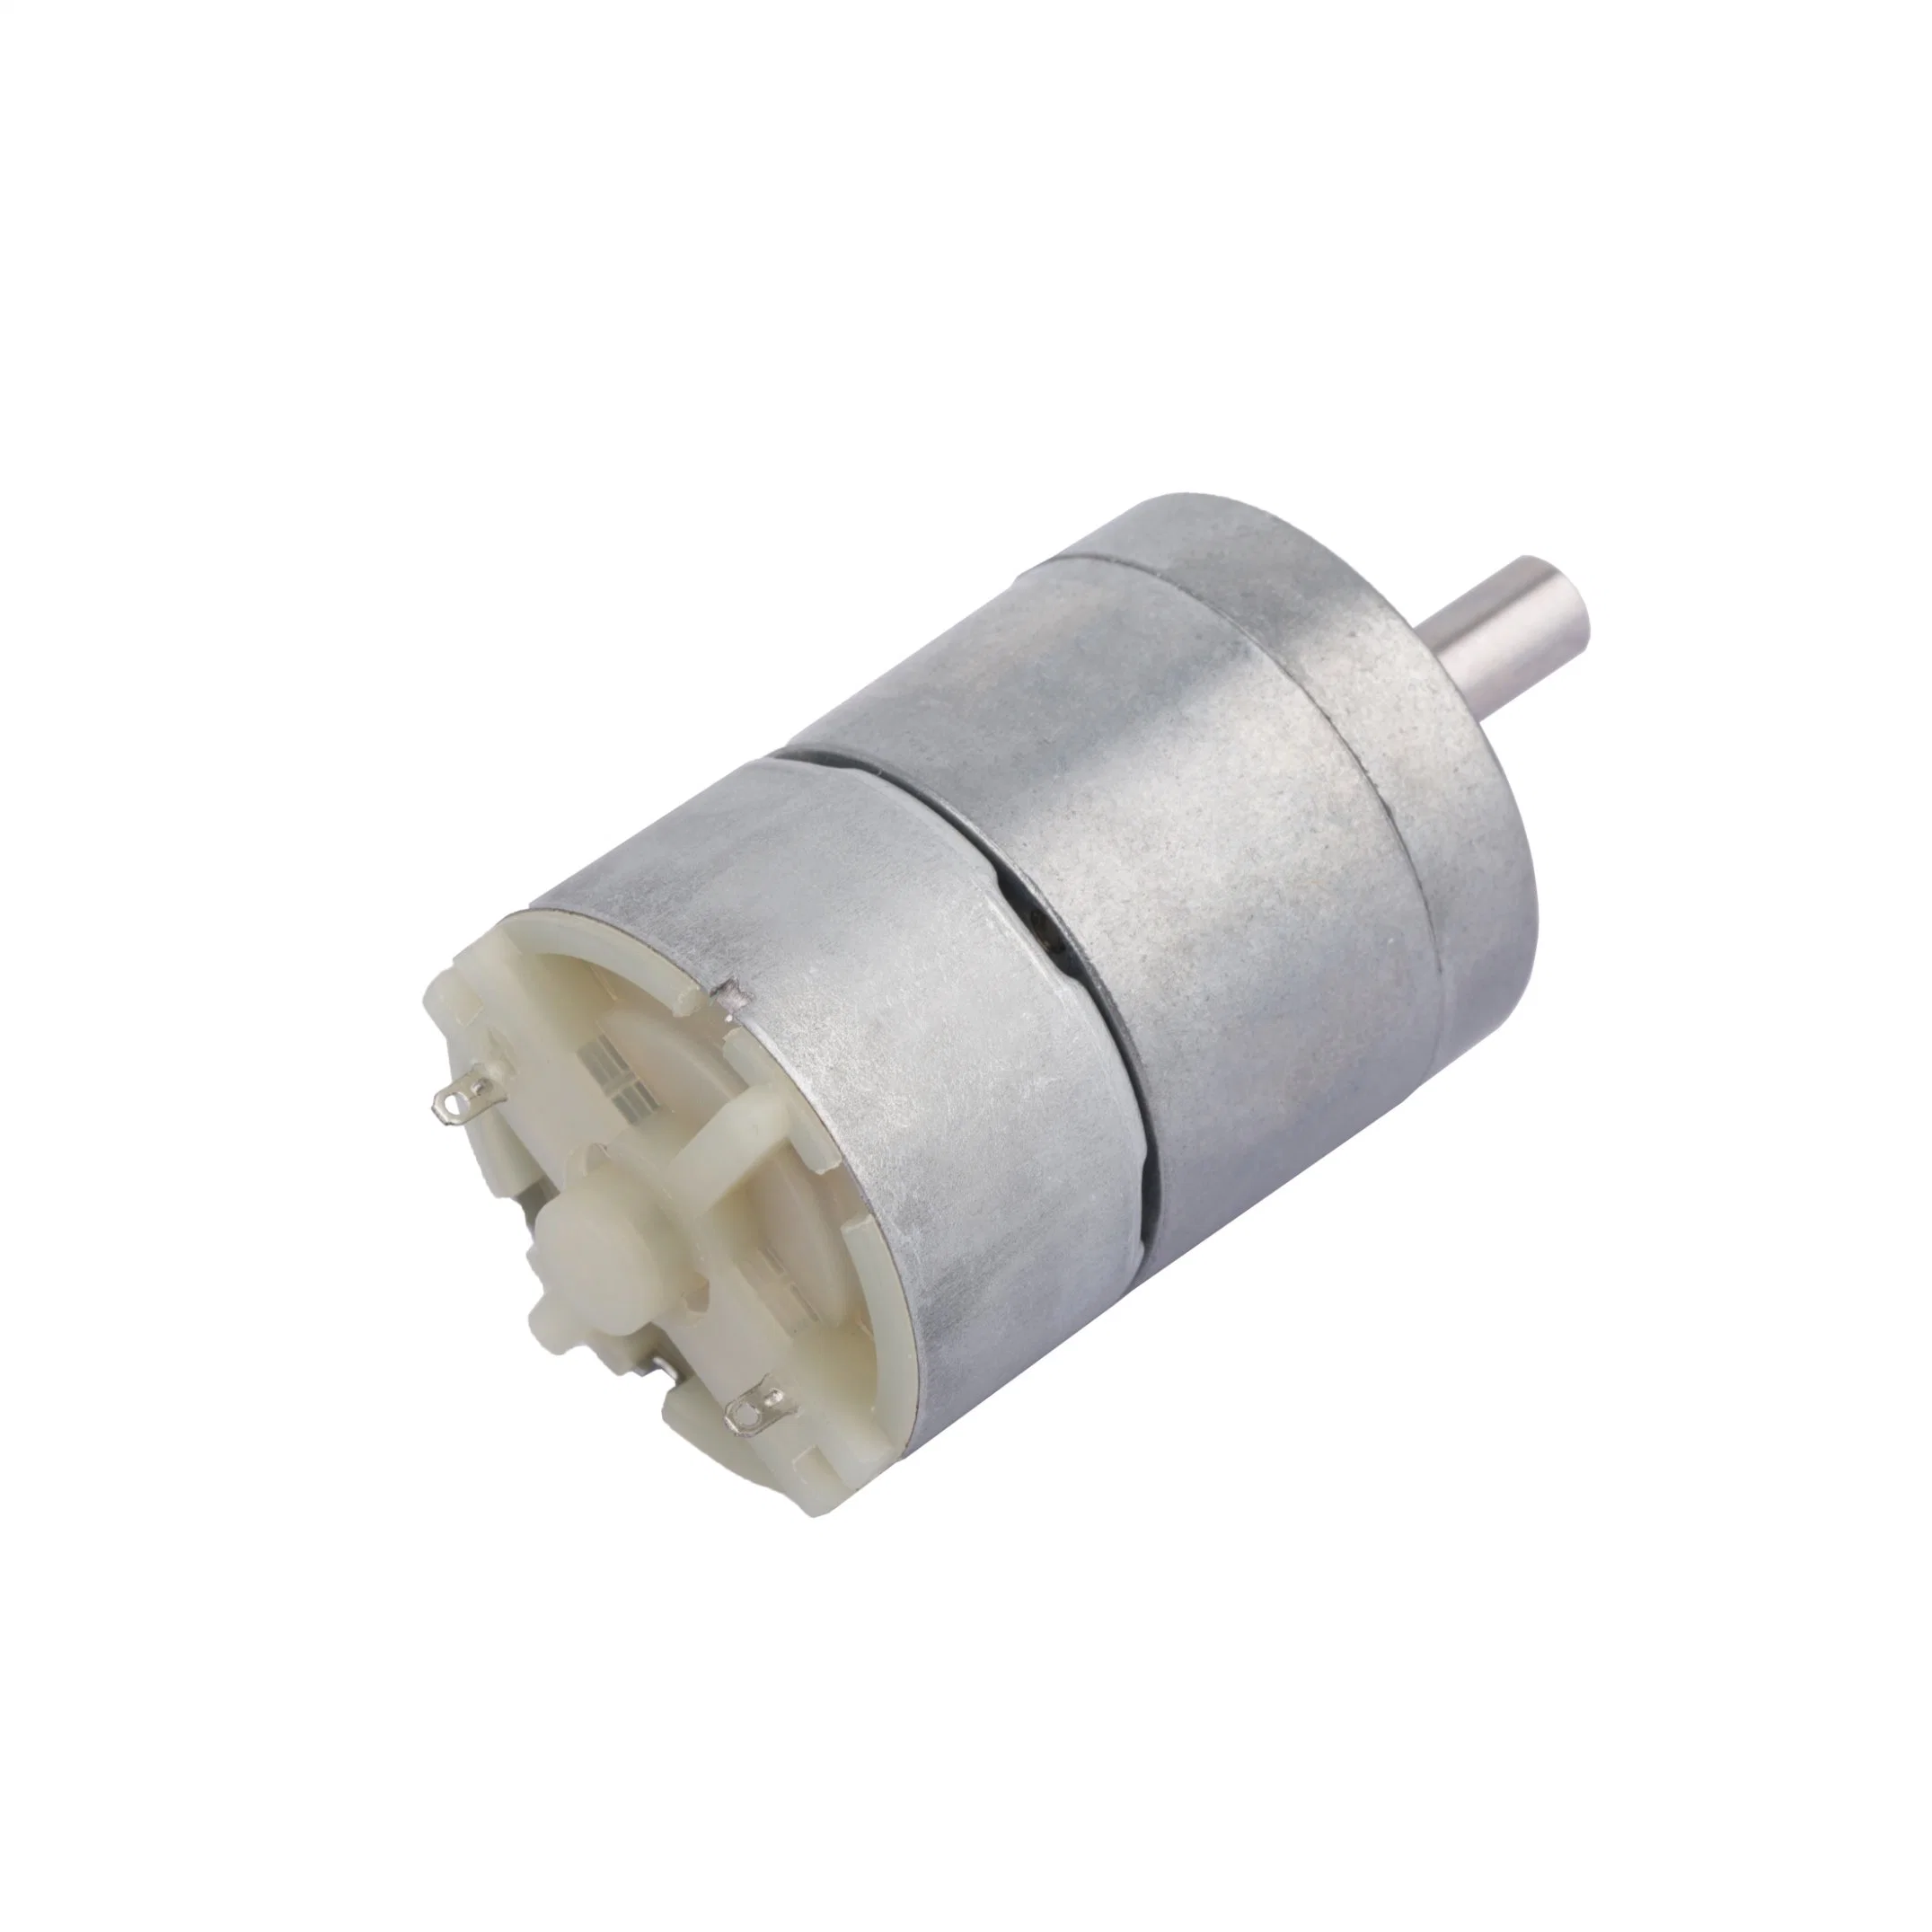 DC Gear Motor 12 Volt Electric Gearbox Motor for Centrifuge Customized